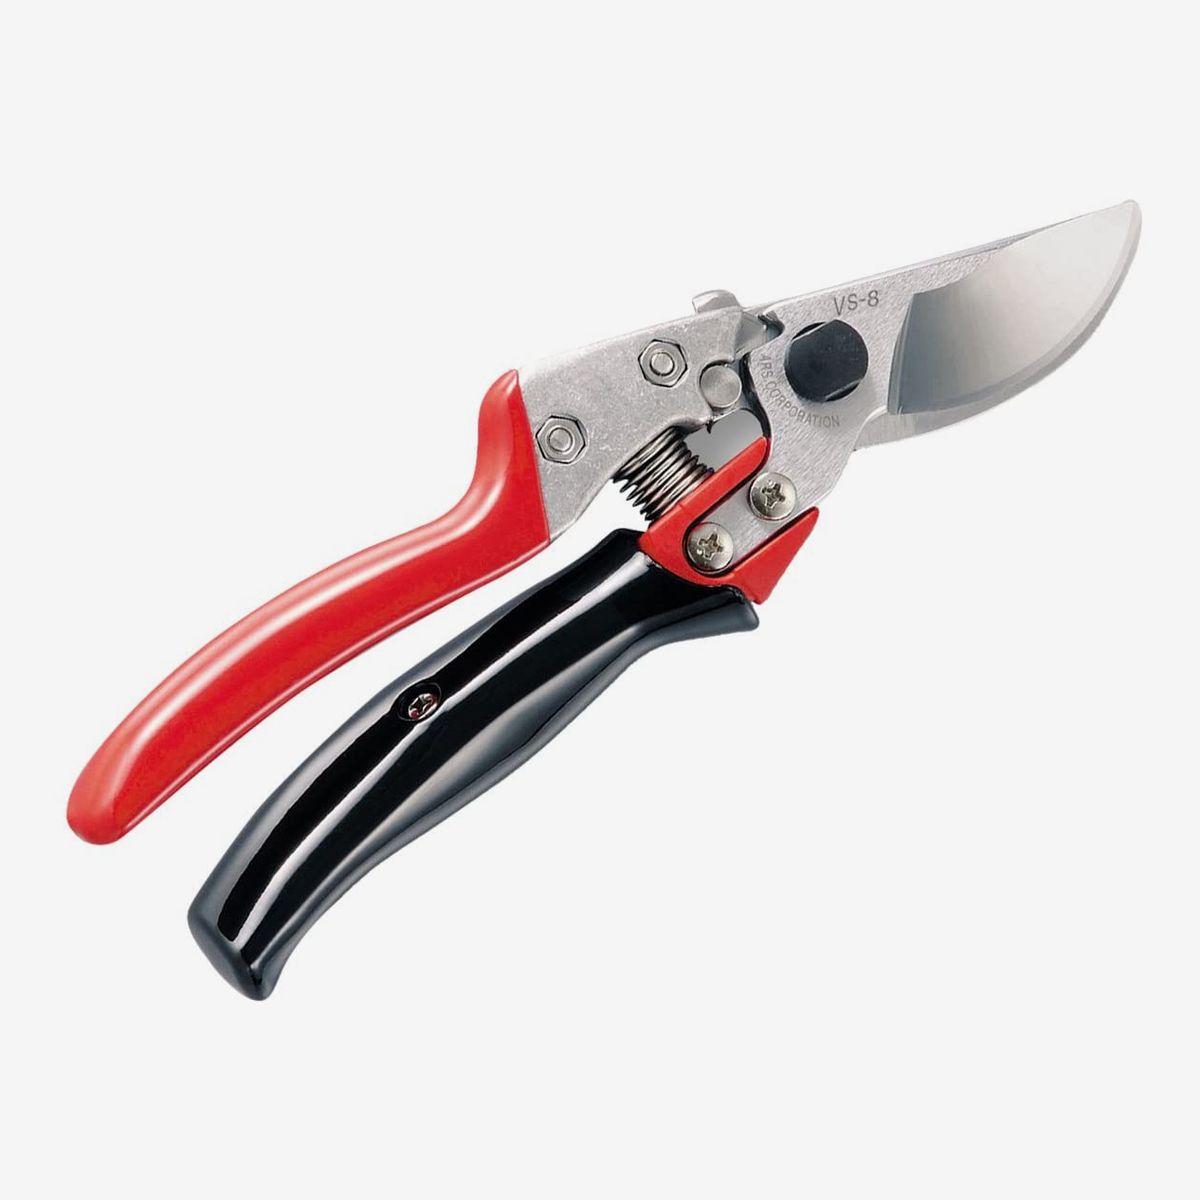 Pruning Scissors 19 Best Garden Shears, Loppers, and Pruners 2021 | The Strategist